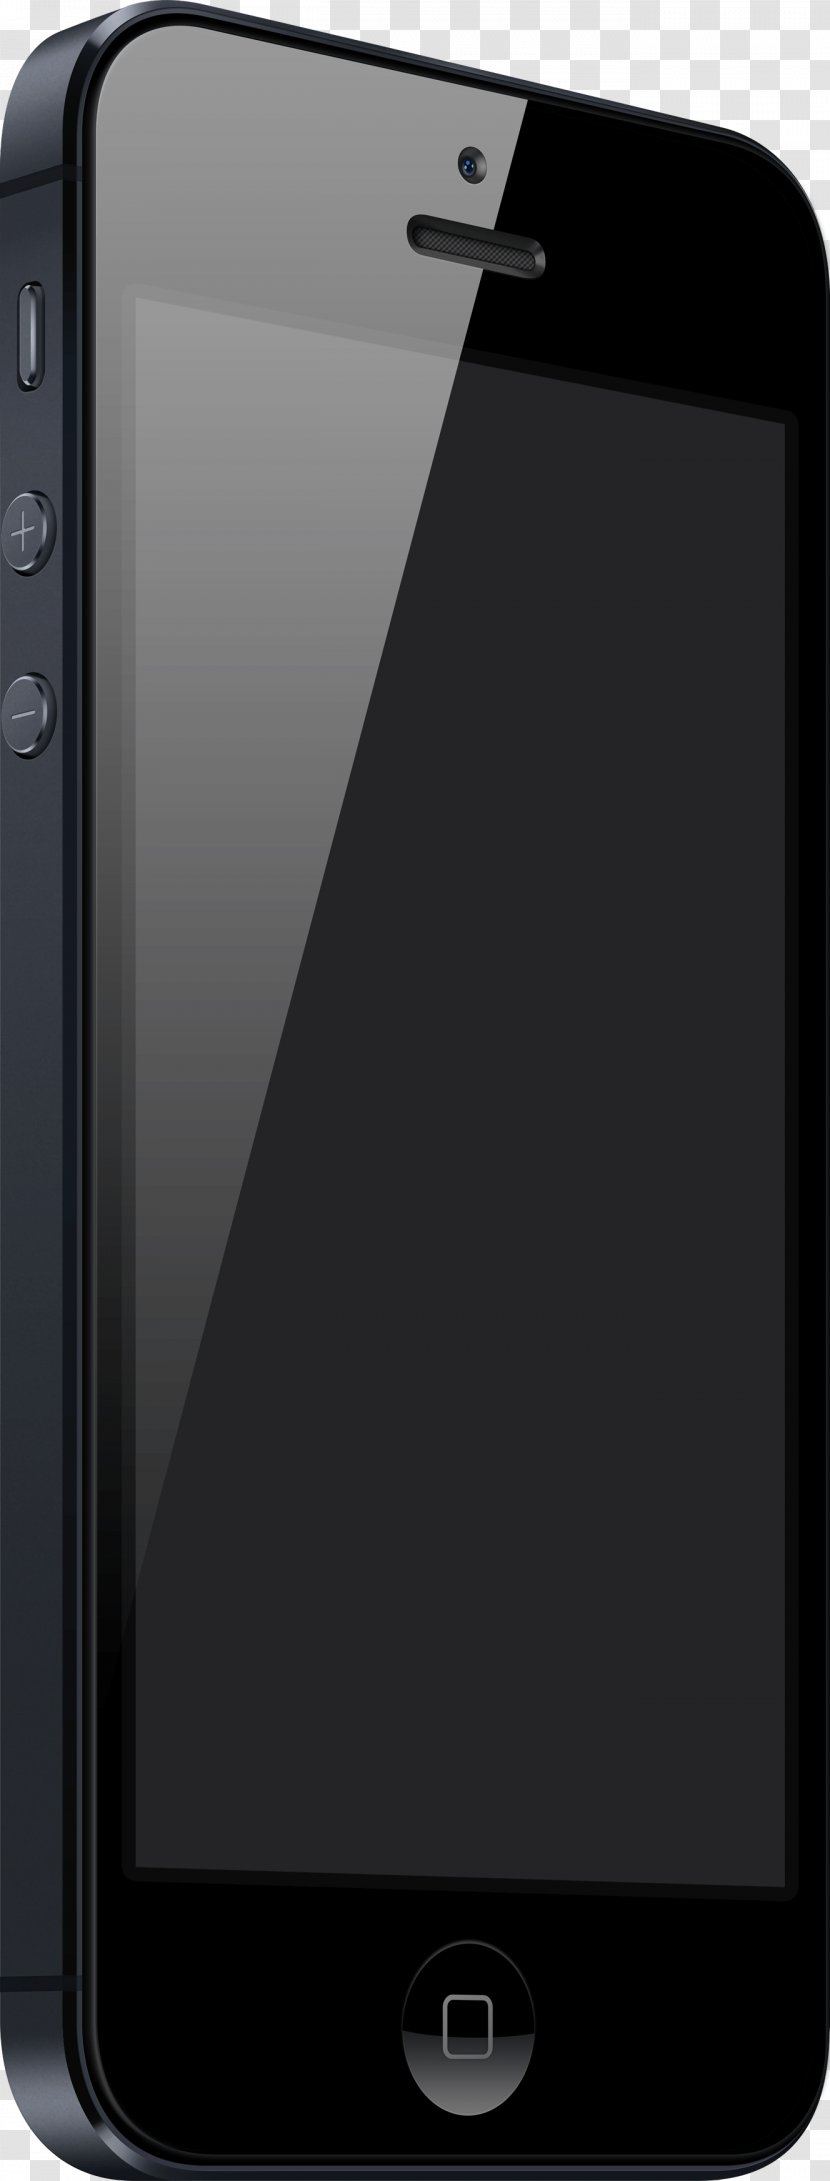 IPhone 4S 3GS 5 - Feature Phone - Apple Iphone Image Transparent PNG